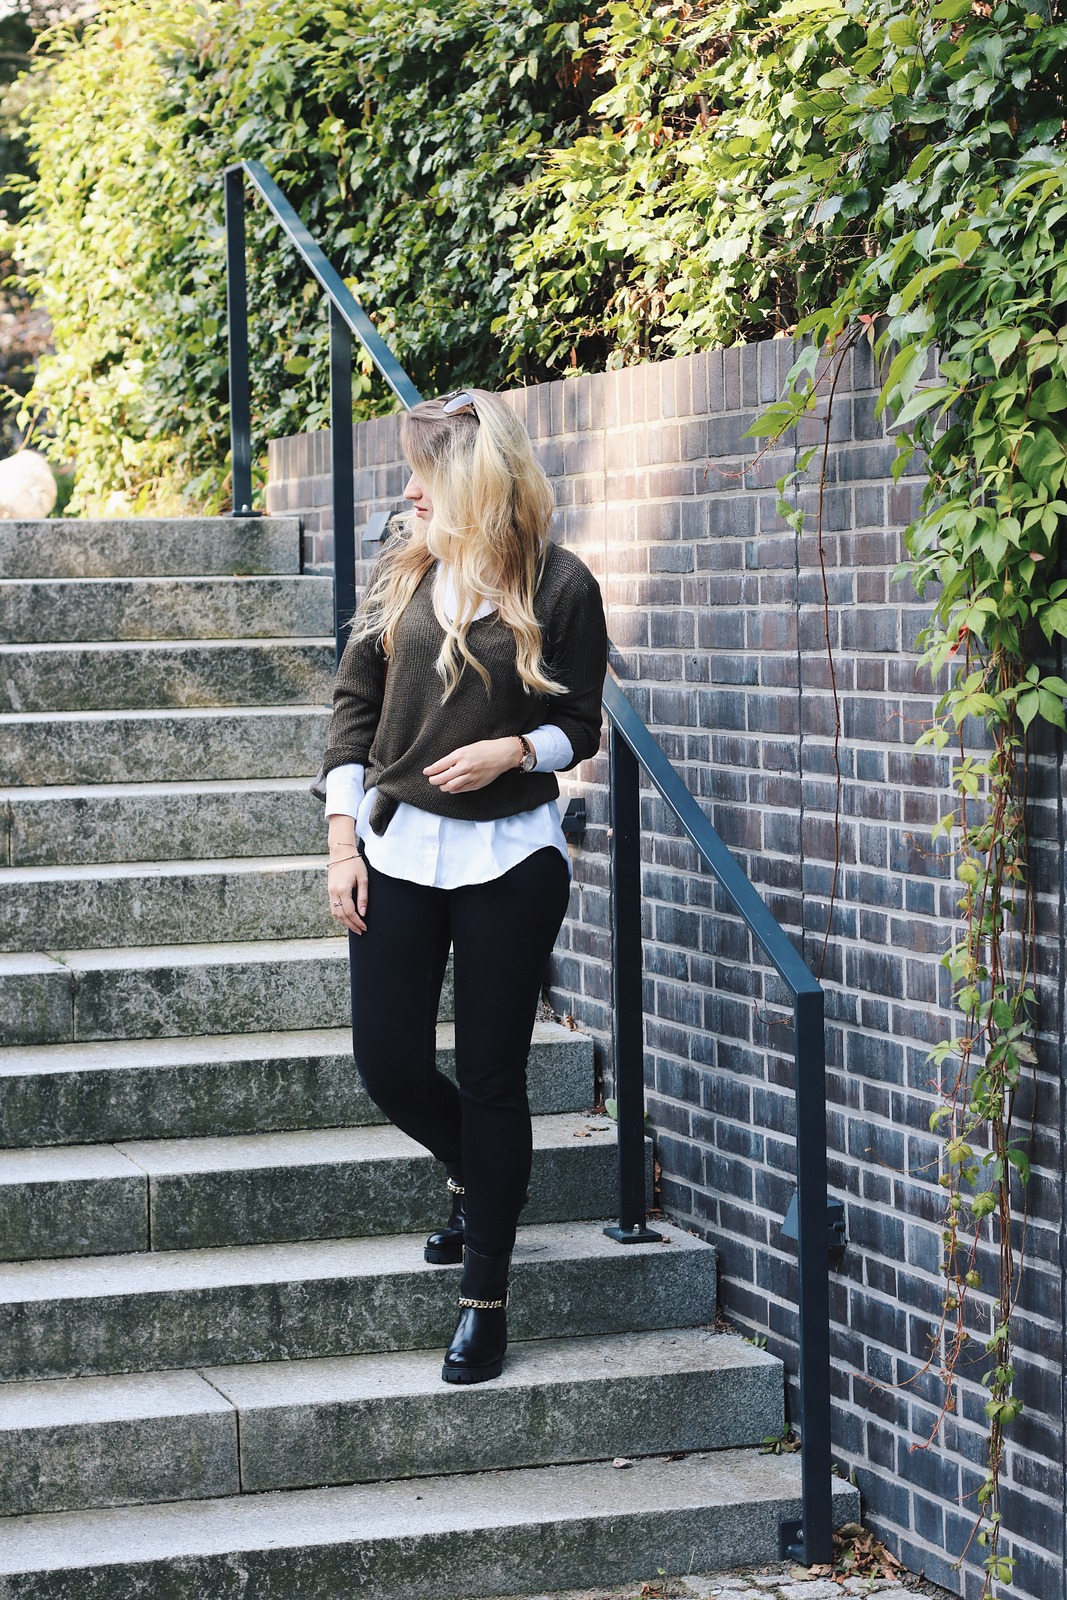 Herbst Trend Lagenlook Outfit Blogger Oliv Sweater Pullover Jeans schwarz Bluse Sac Noe Marc Cain Boots